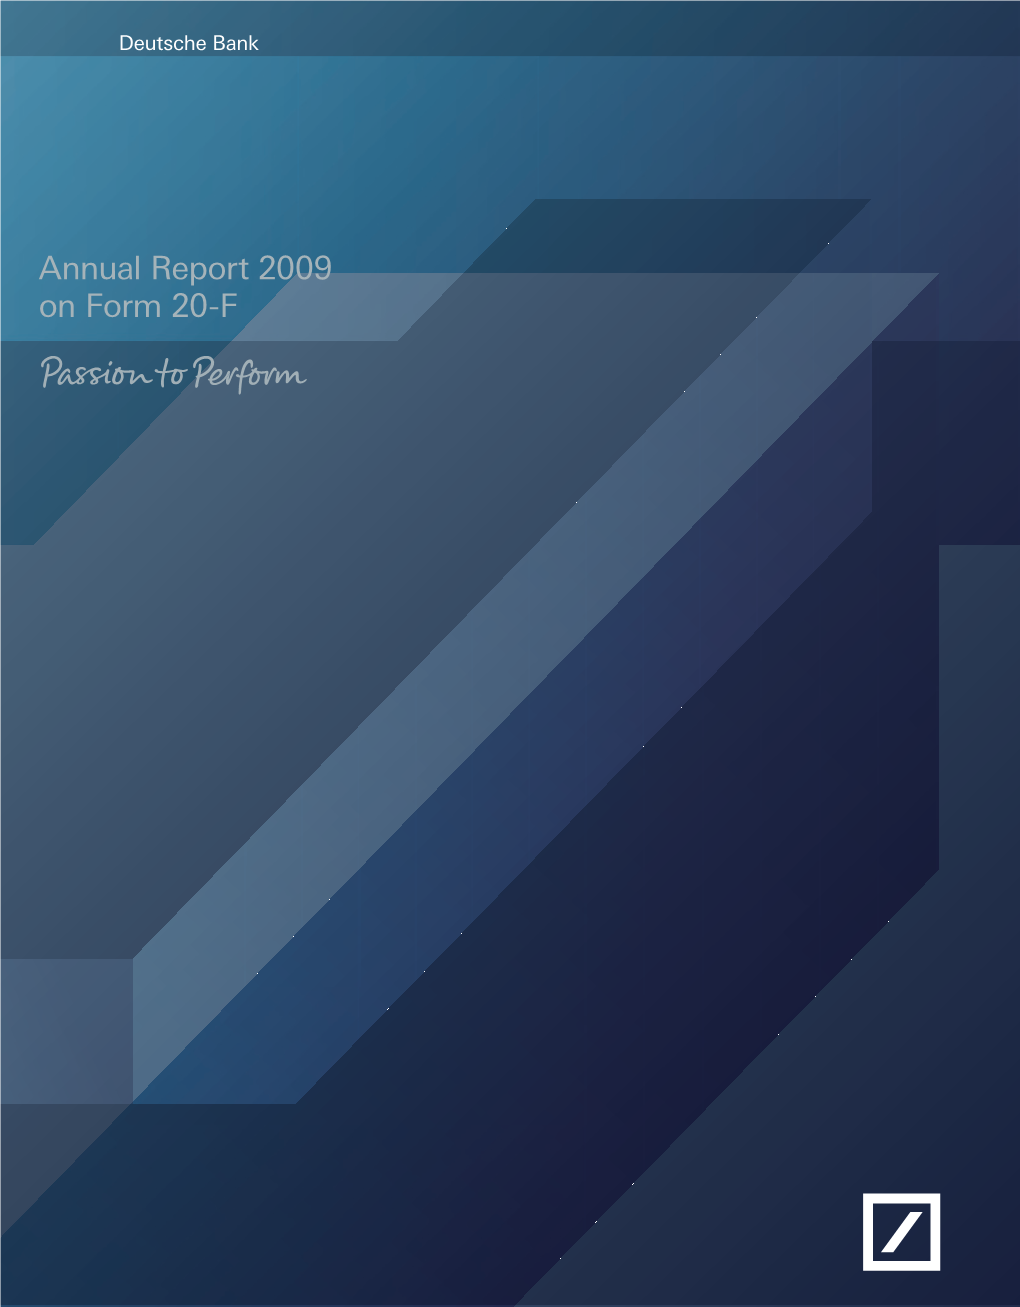 Annual Report 2009 on Form 20-F